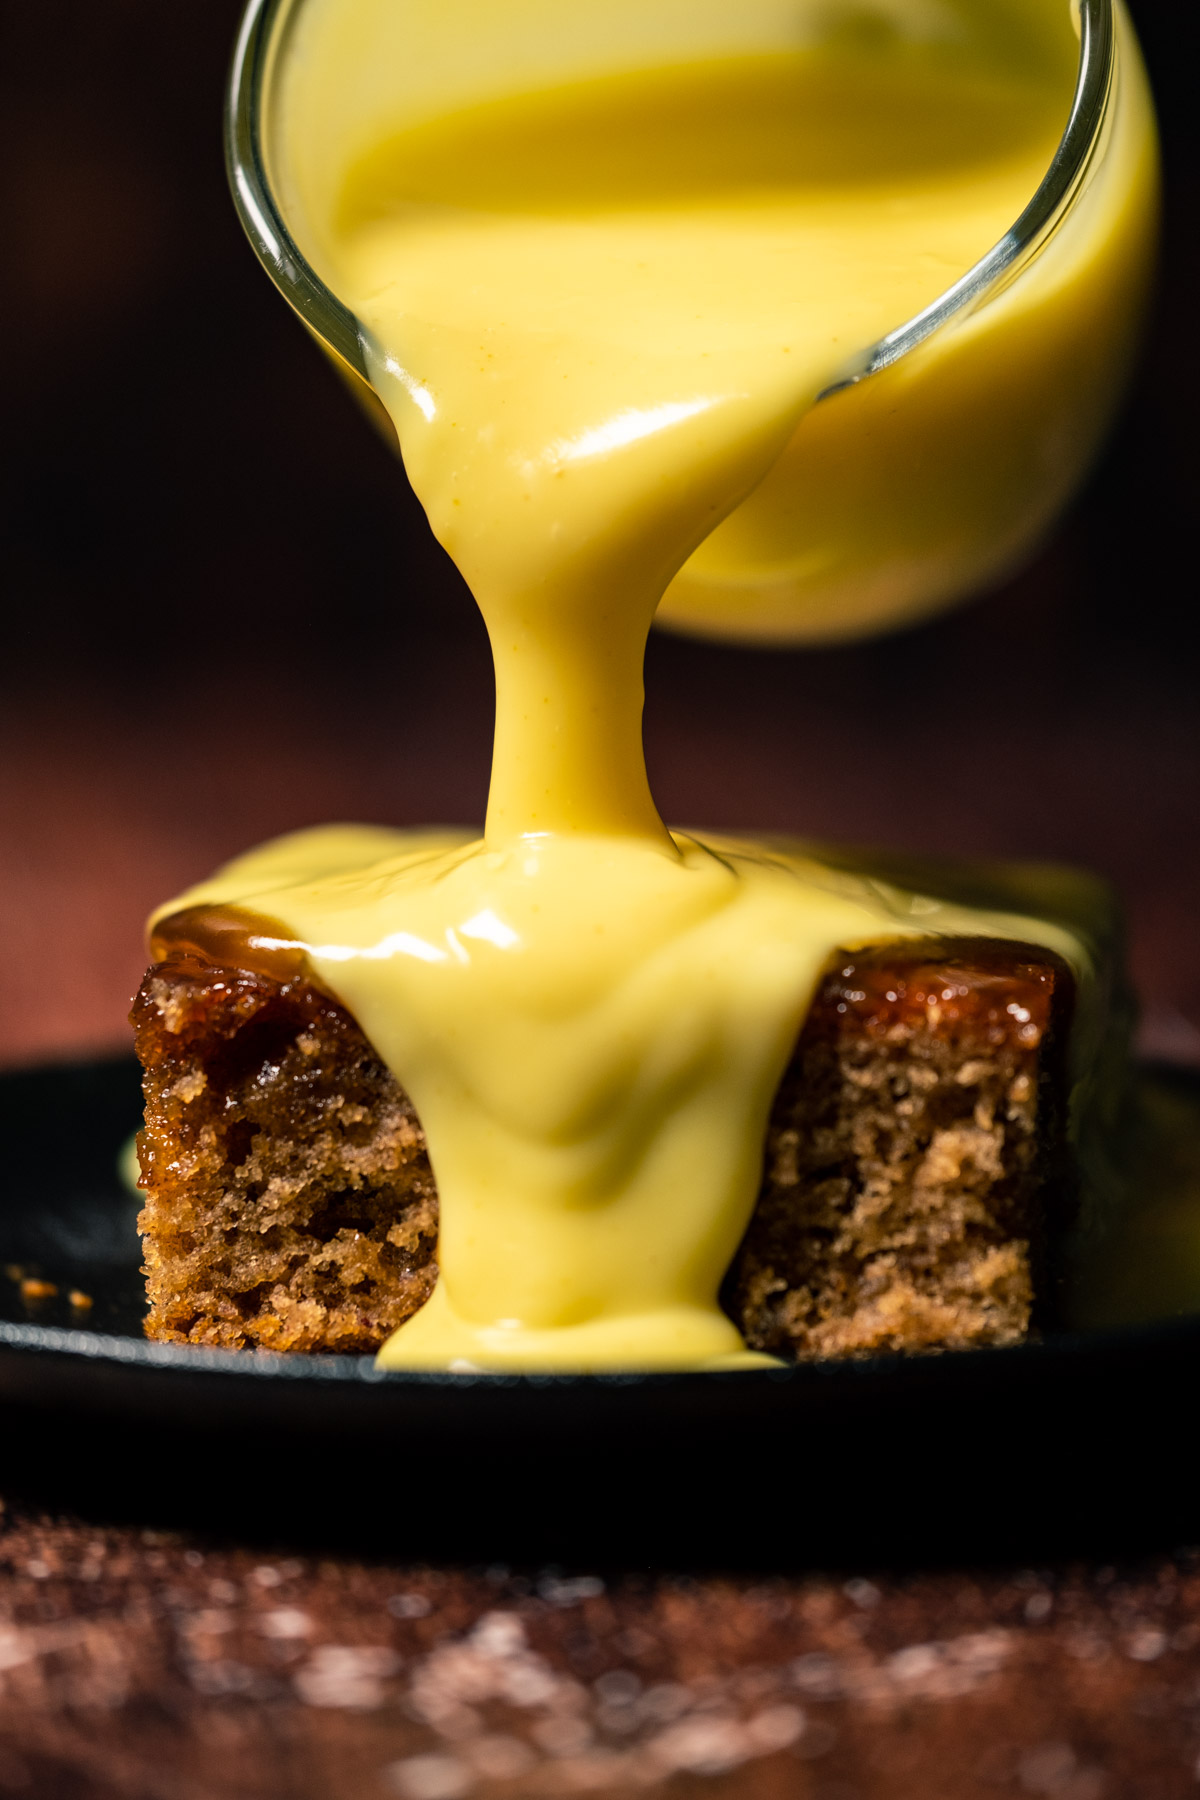 Custard pouring from a glass jug over a slice of sticky toffee pudding.